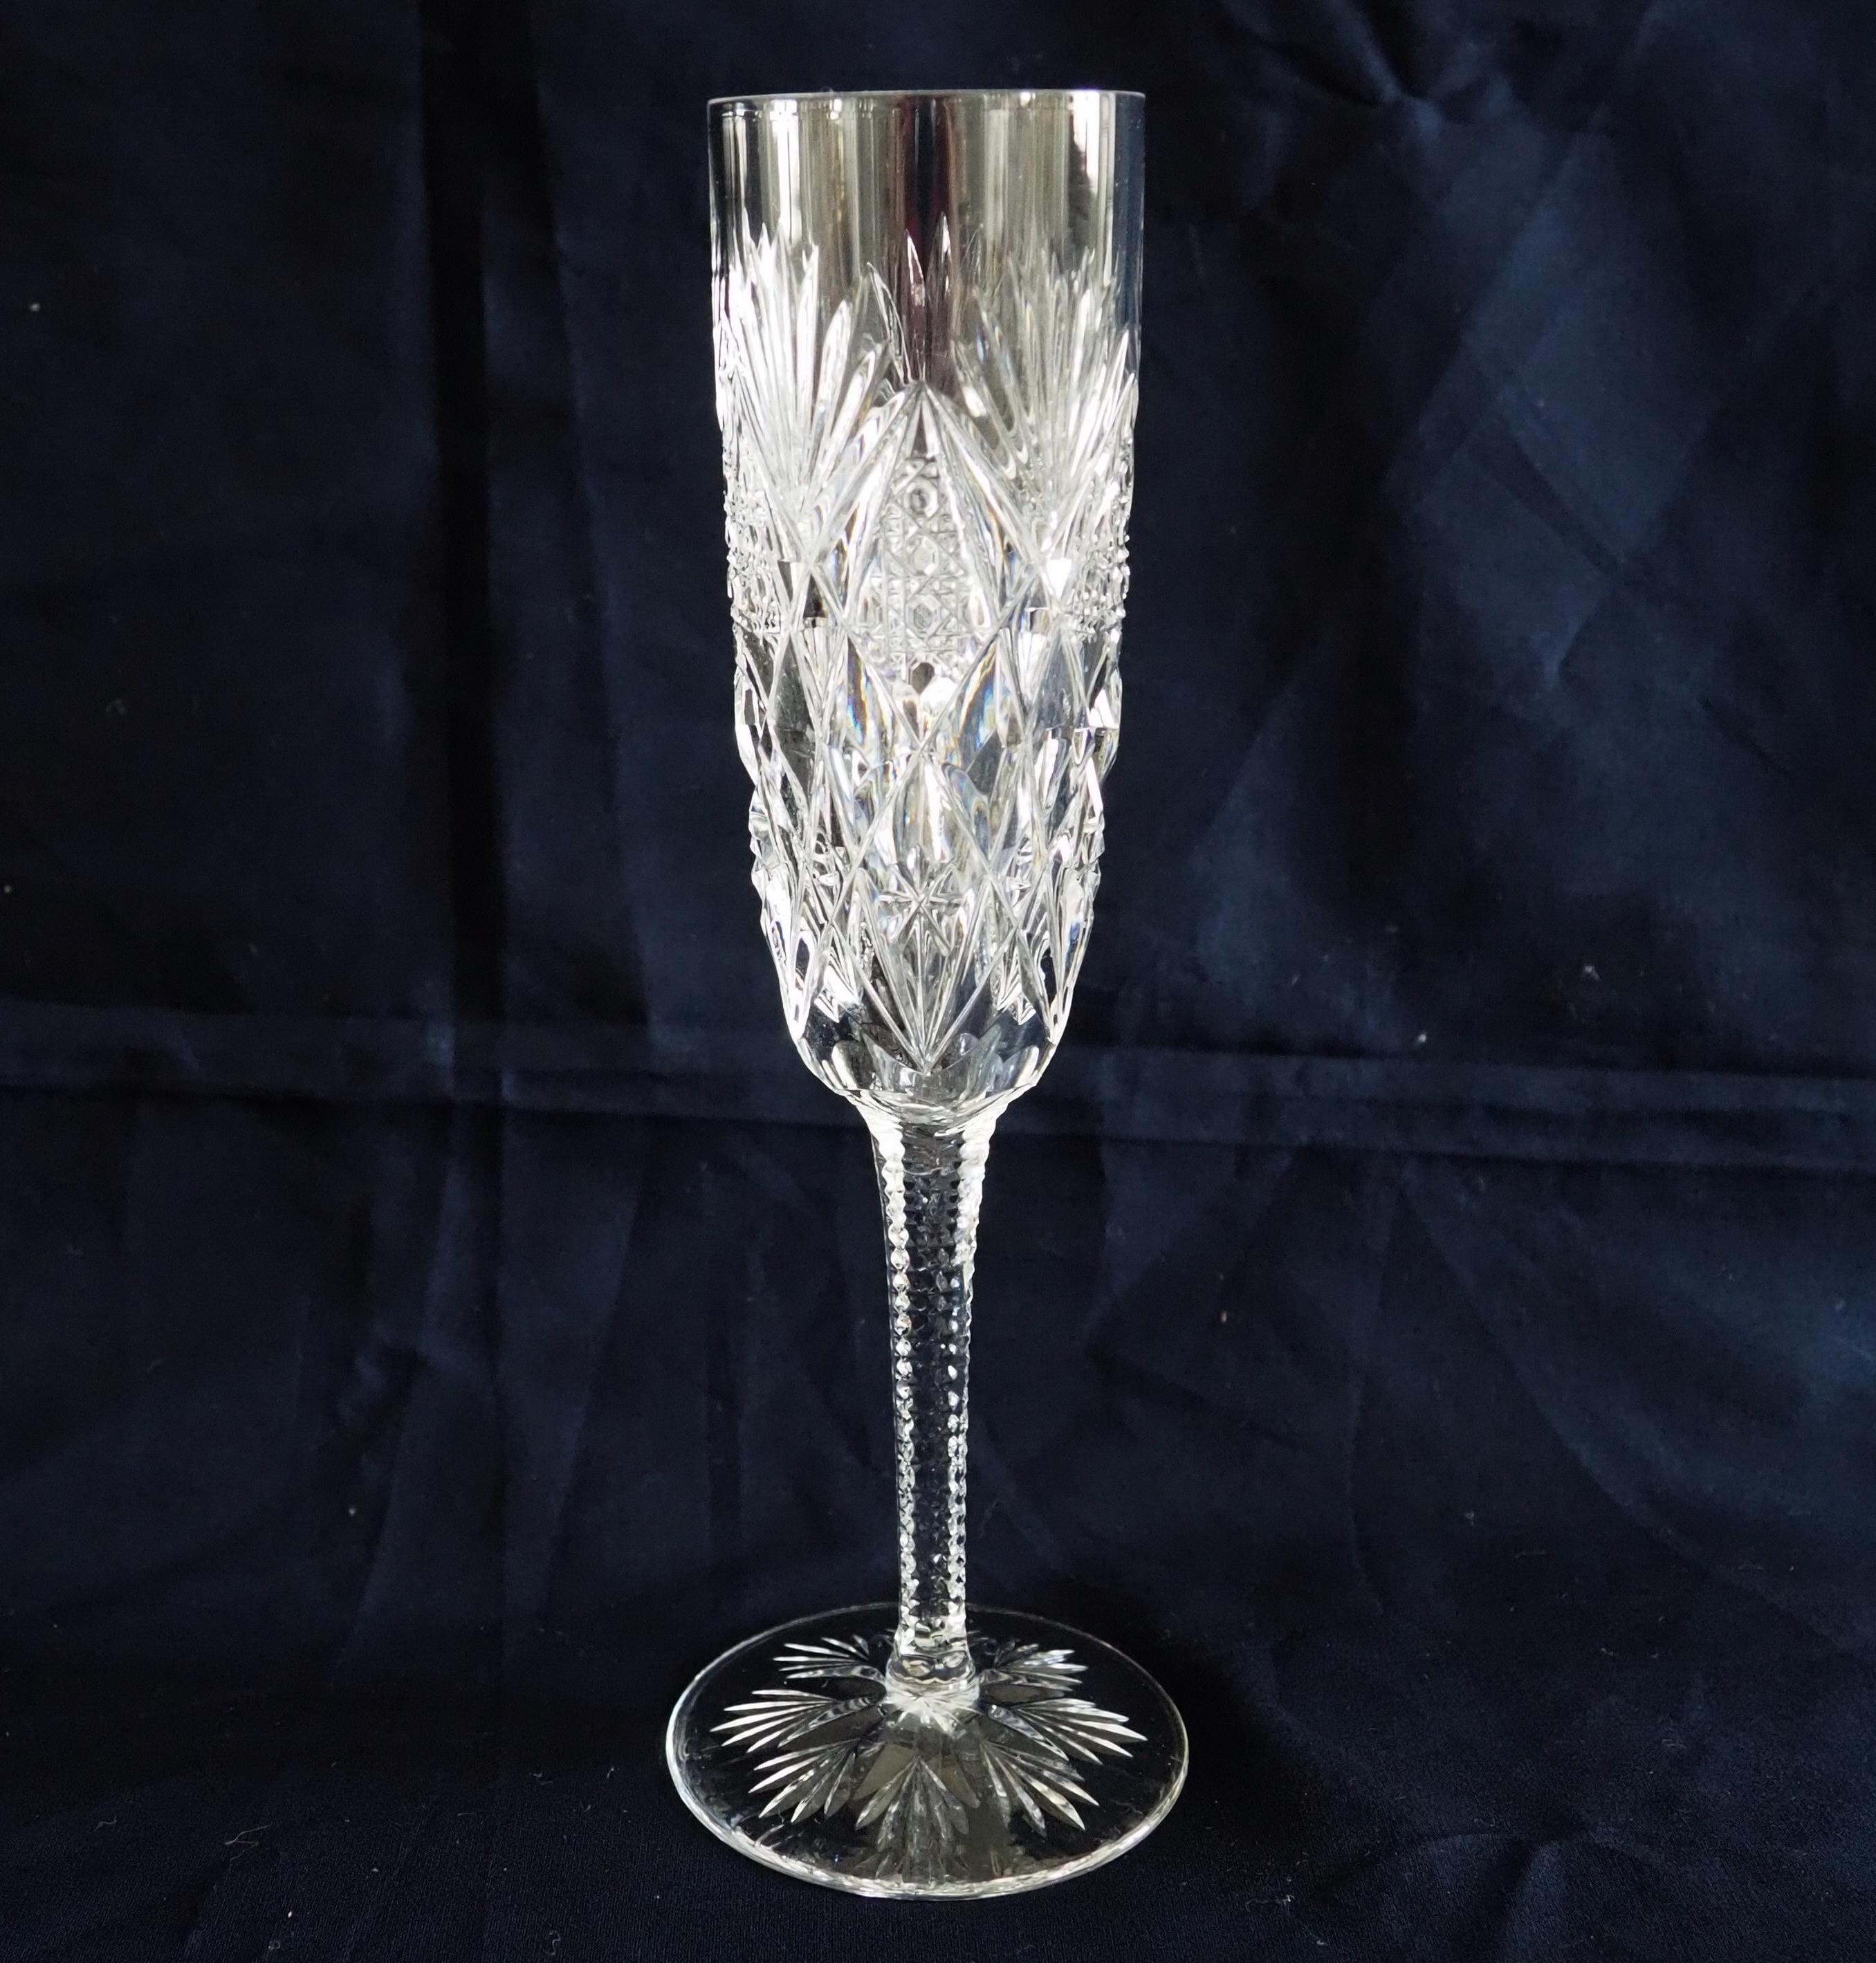 Set of 24 St Louis crystal glasses (6*4), Florence pattern - signed - 6 guests 5